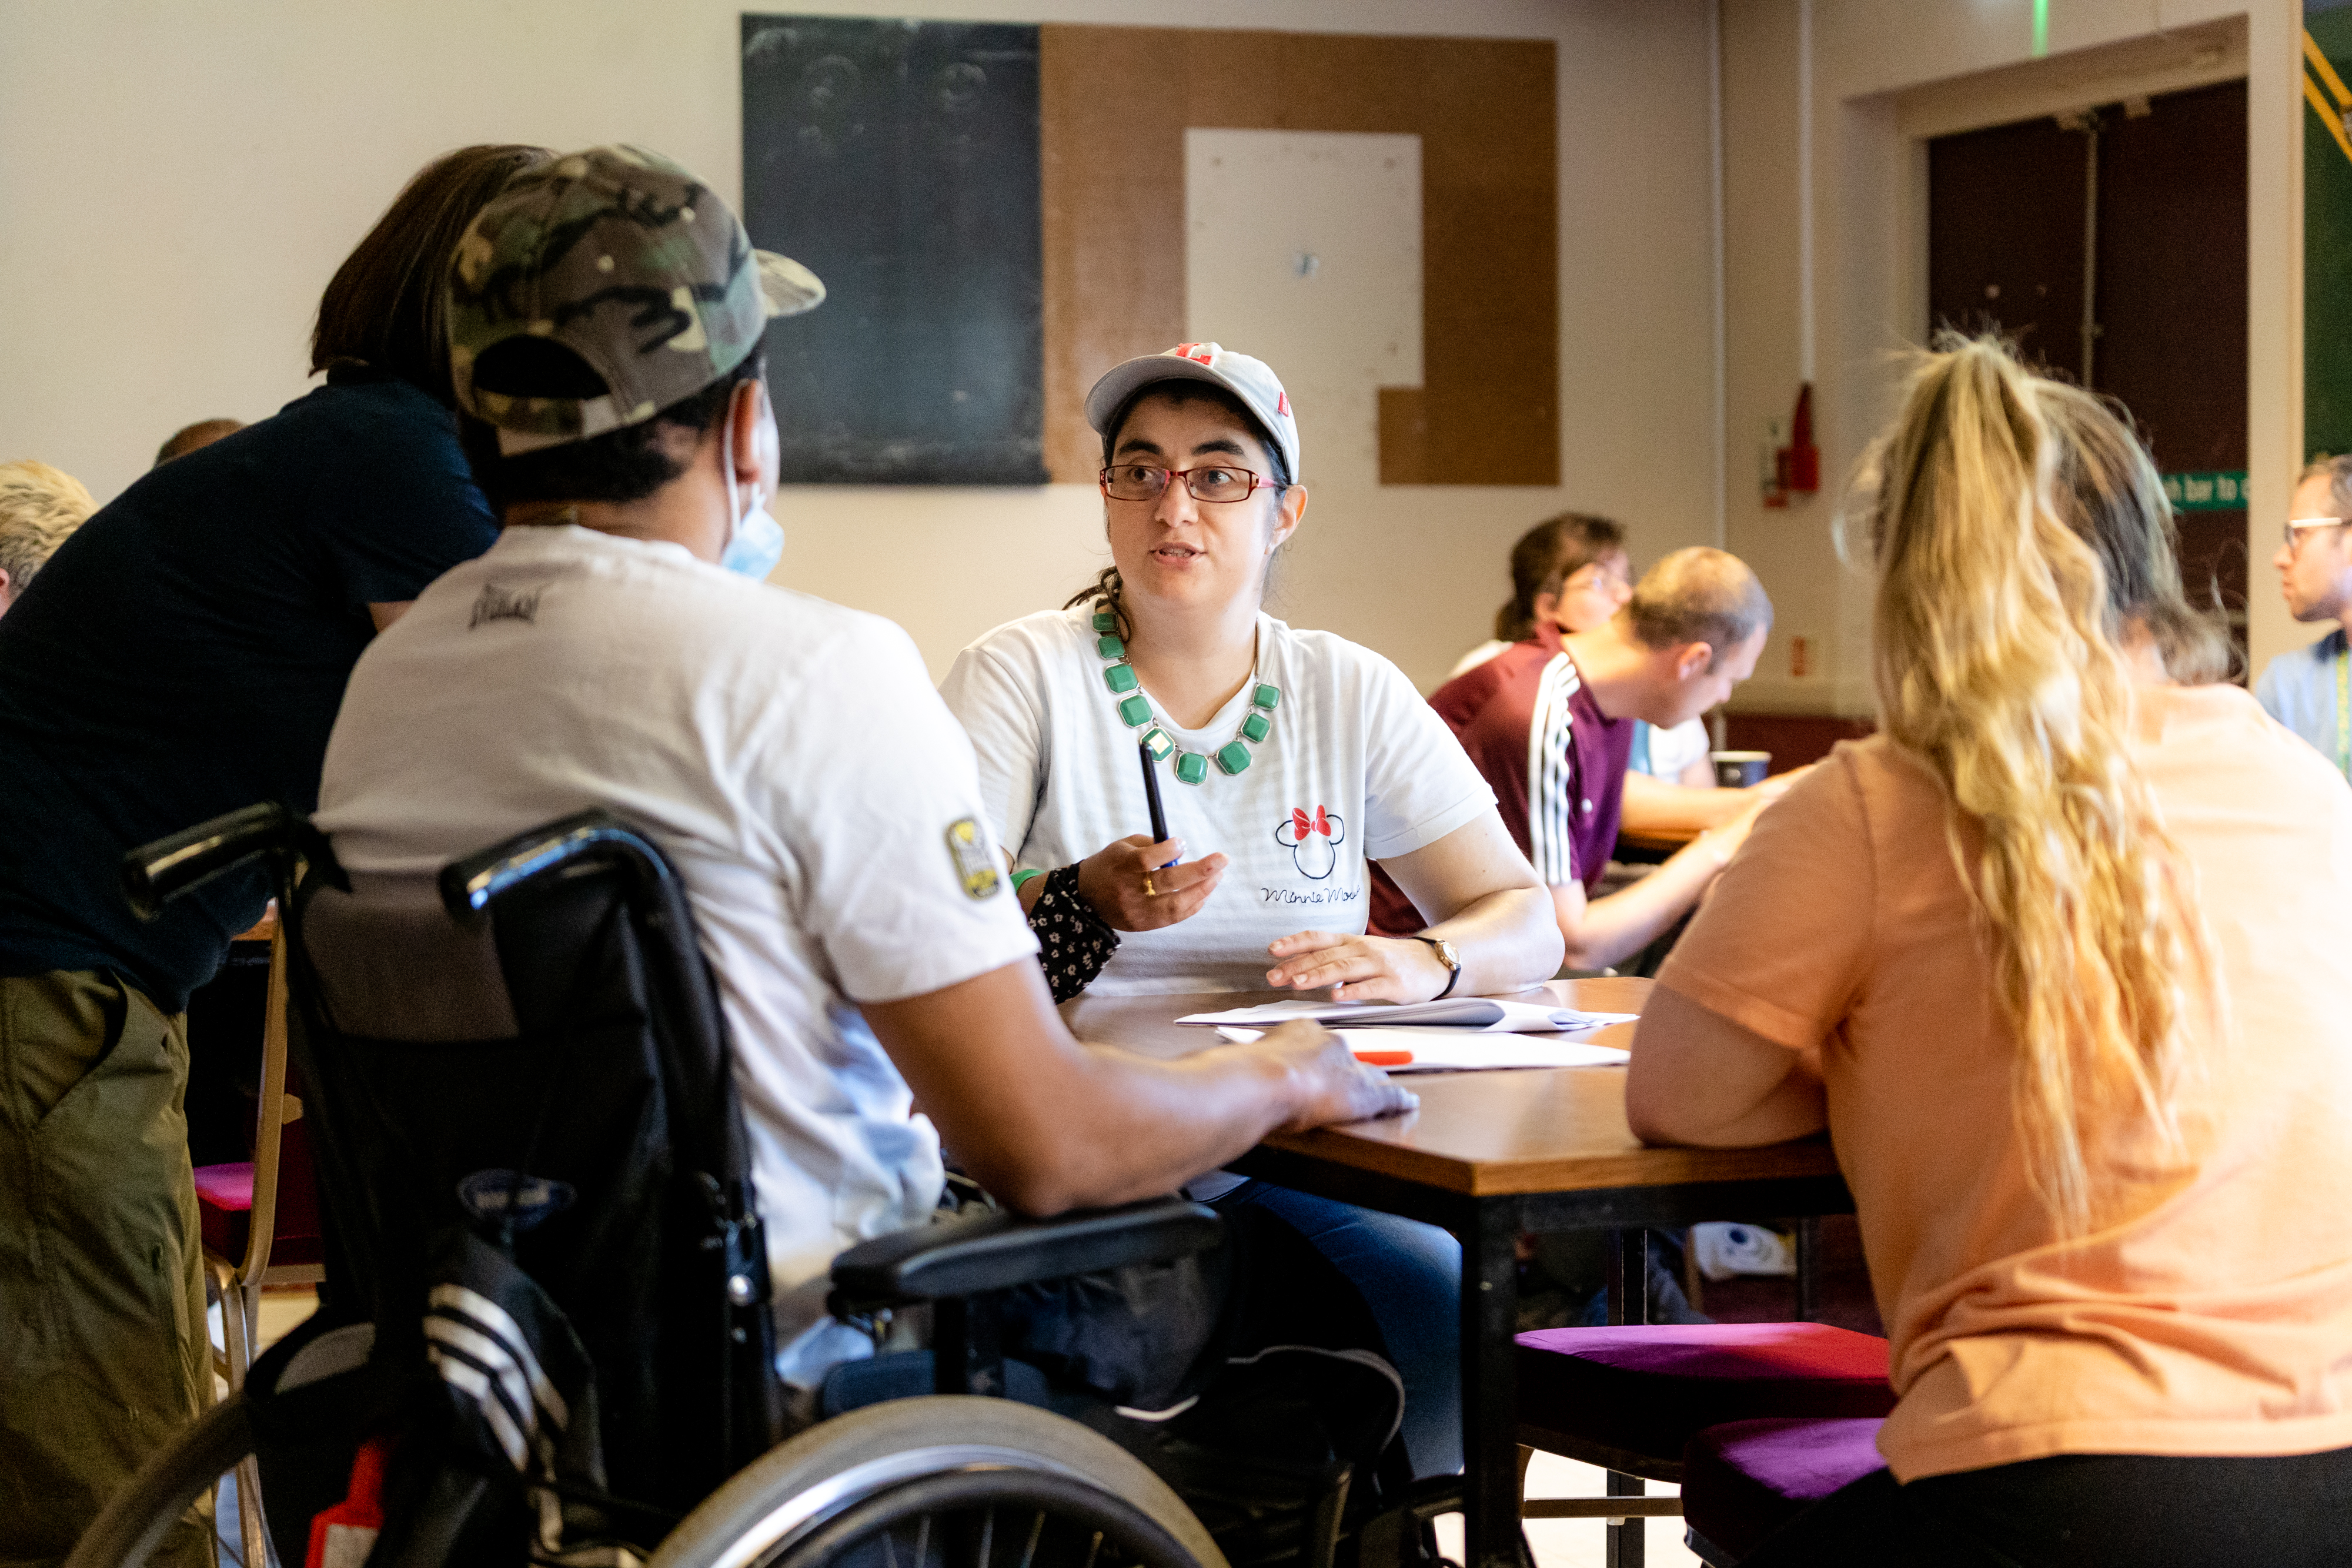 Young adults including wheelchair user in conversation at a table